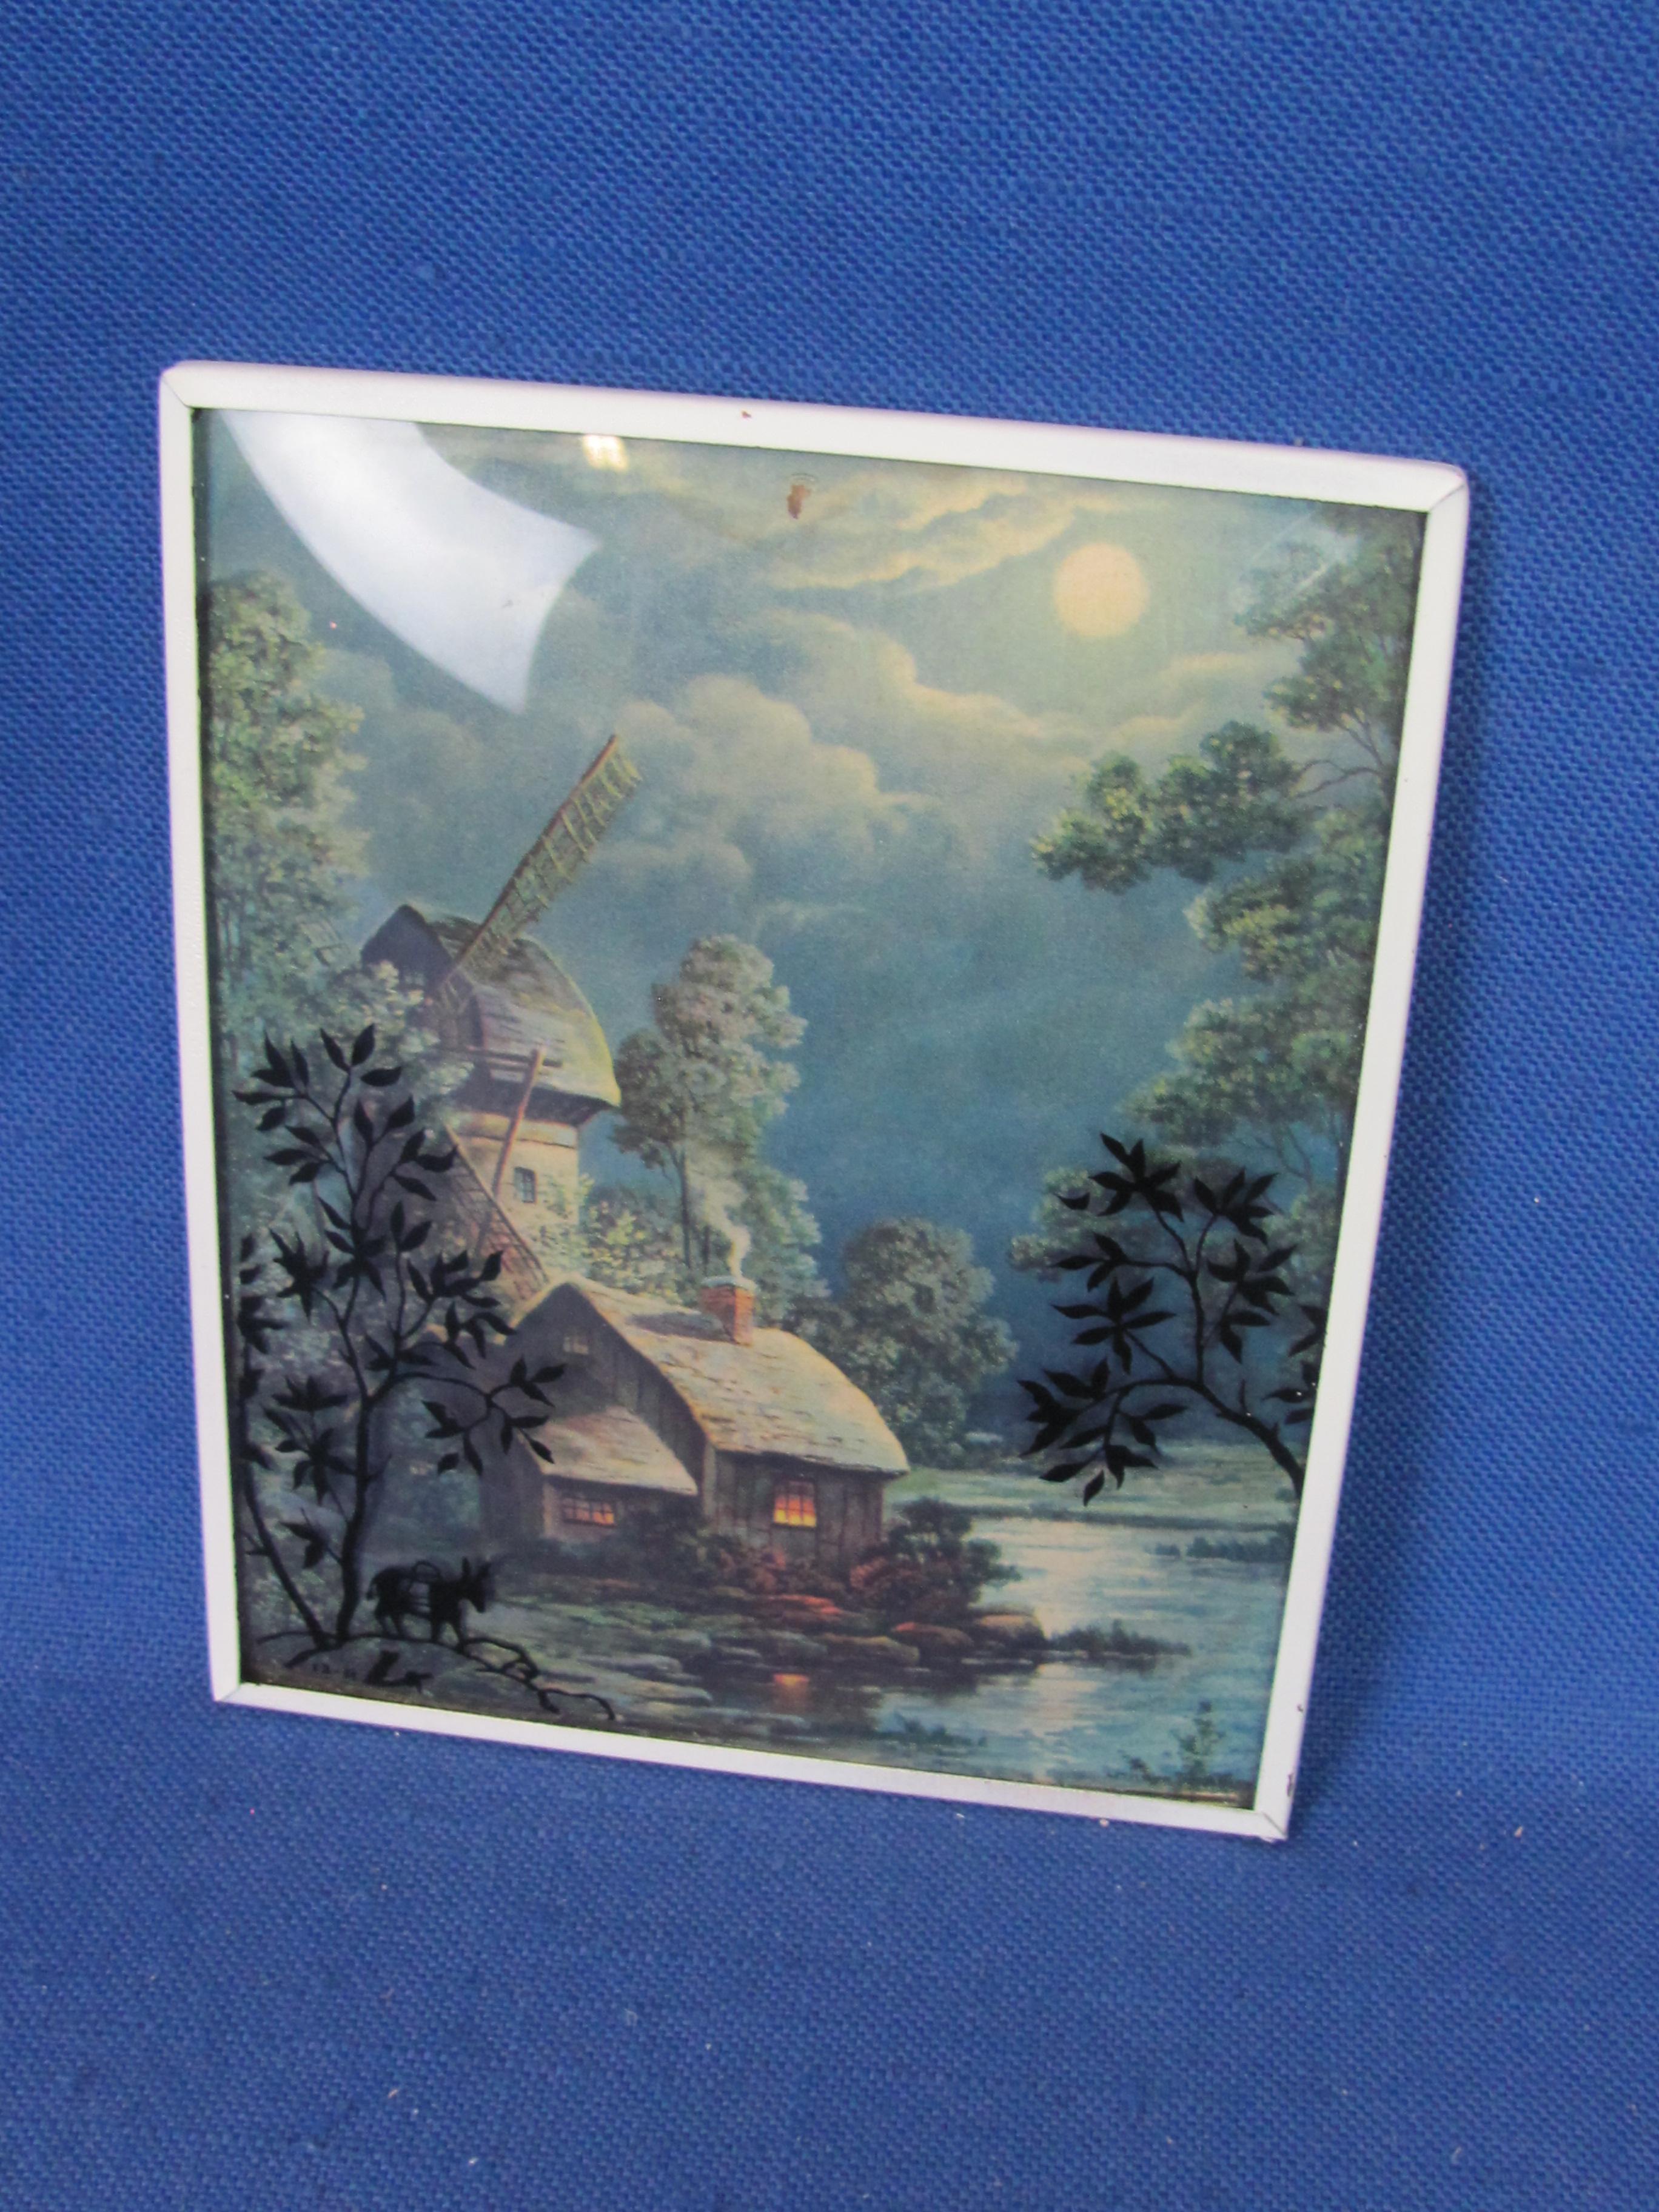 3 Vintage Silhouette Prints – 4” x 5” - River, Mountains, Mill in Moonlight, Stagecoach -